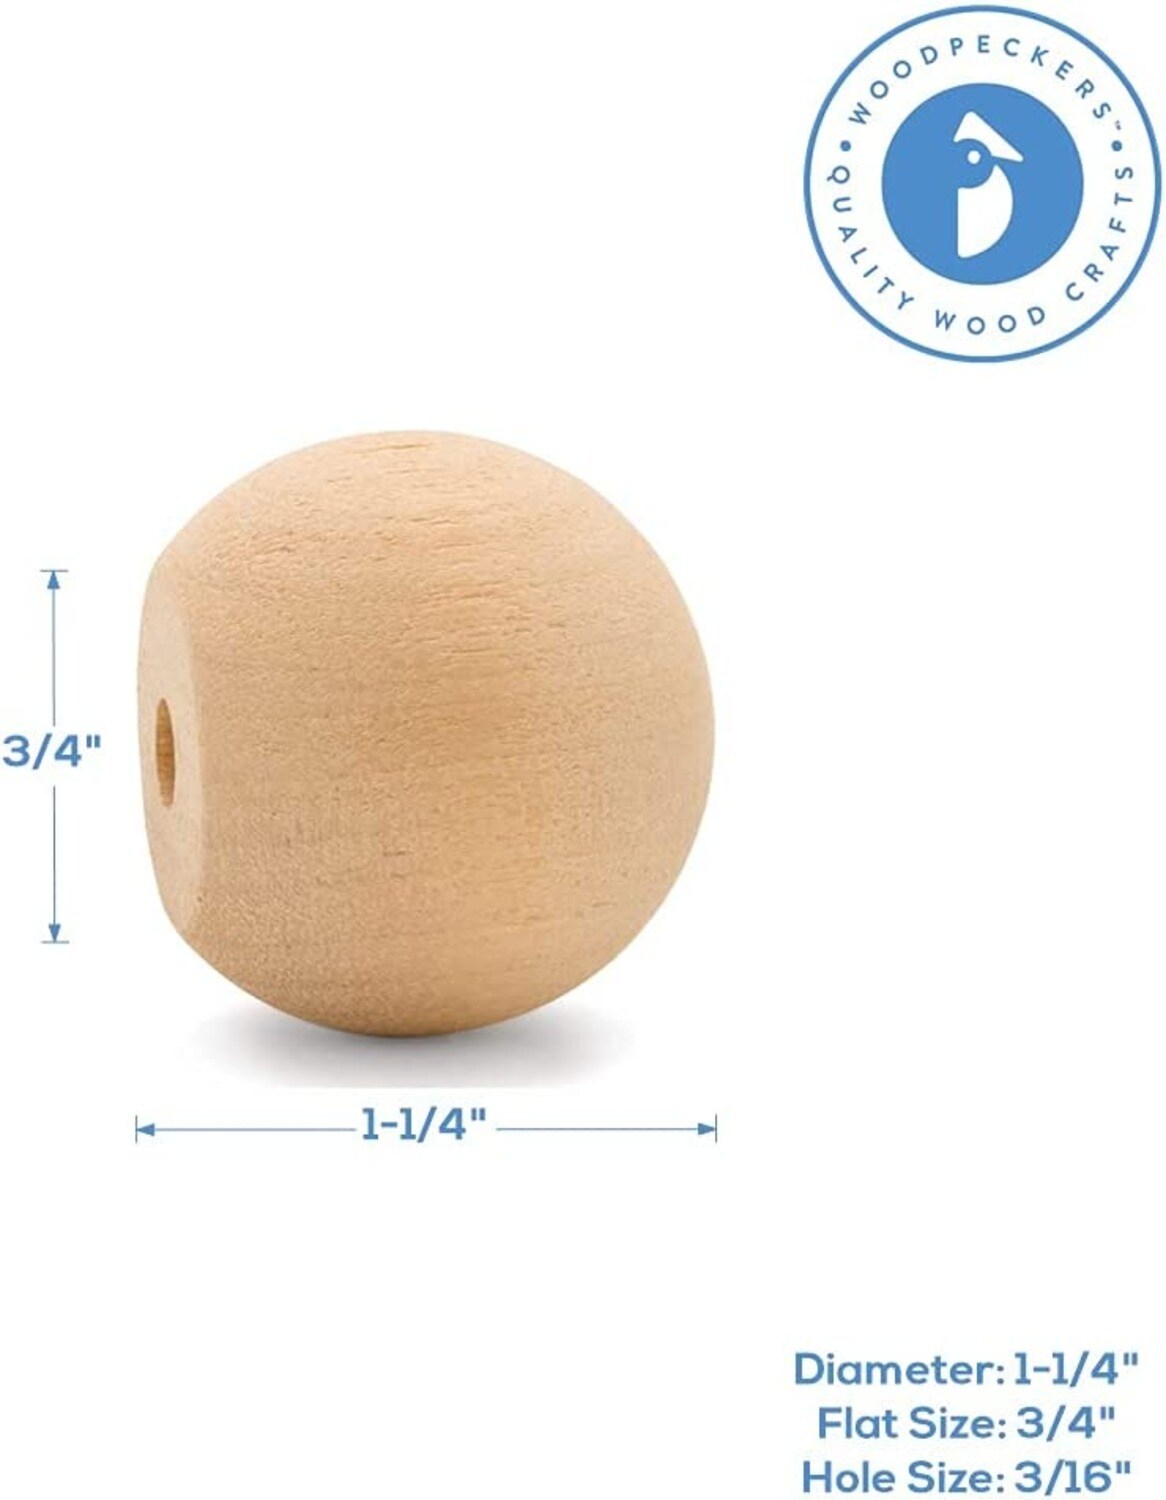 3-1/2 inch Round Wooden Balls for Crafts Bag of 3 Unfinished and Smooth  Round Birch Hardwood Balls and Wooden Spheres by Woodpeckers